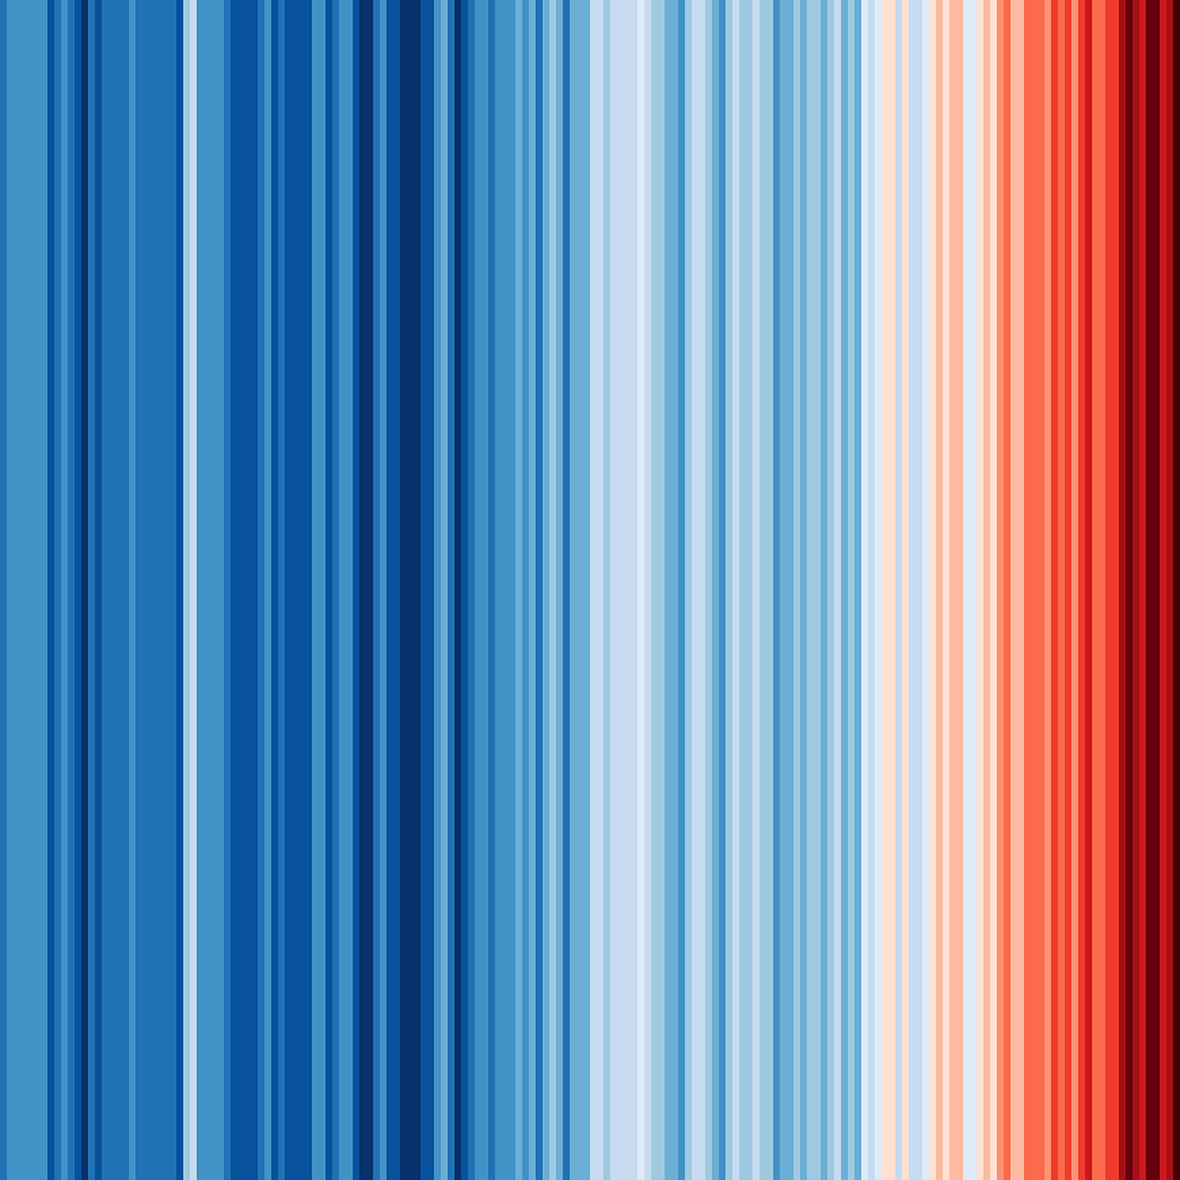 #ShowYourStripes graphic